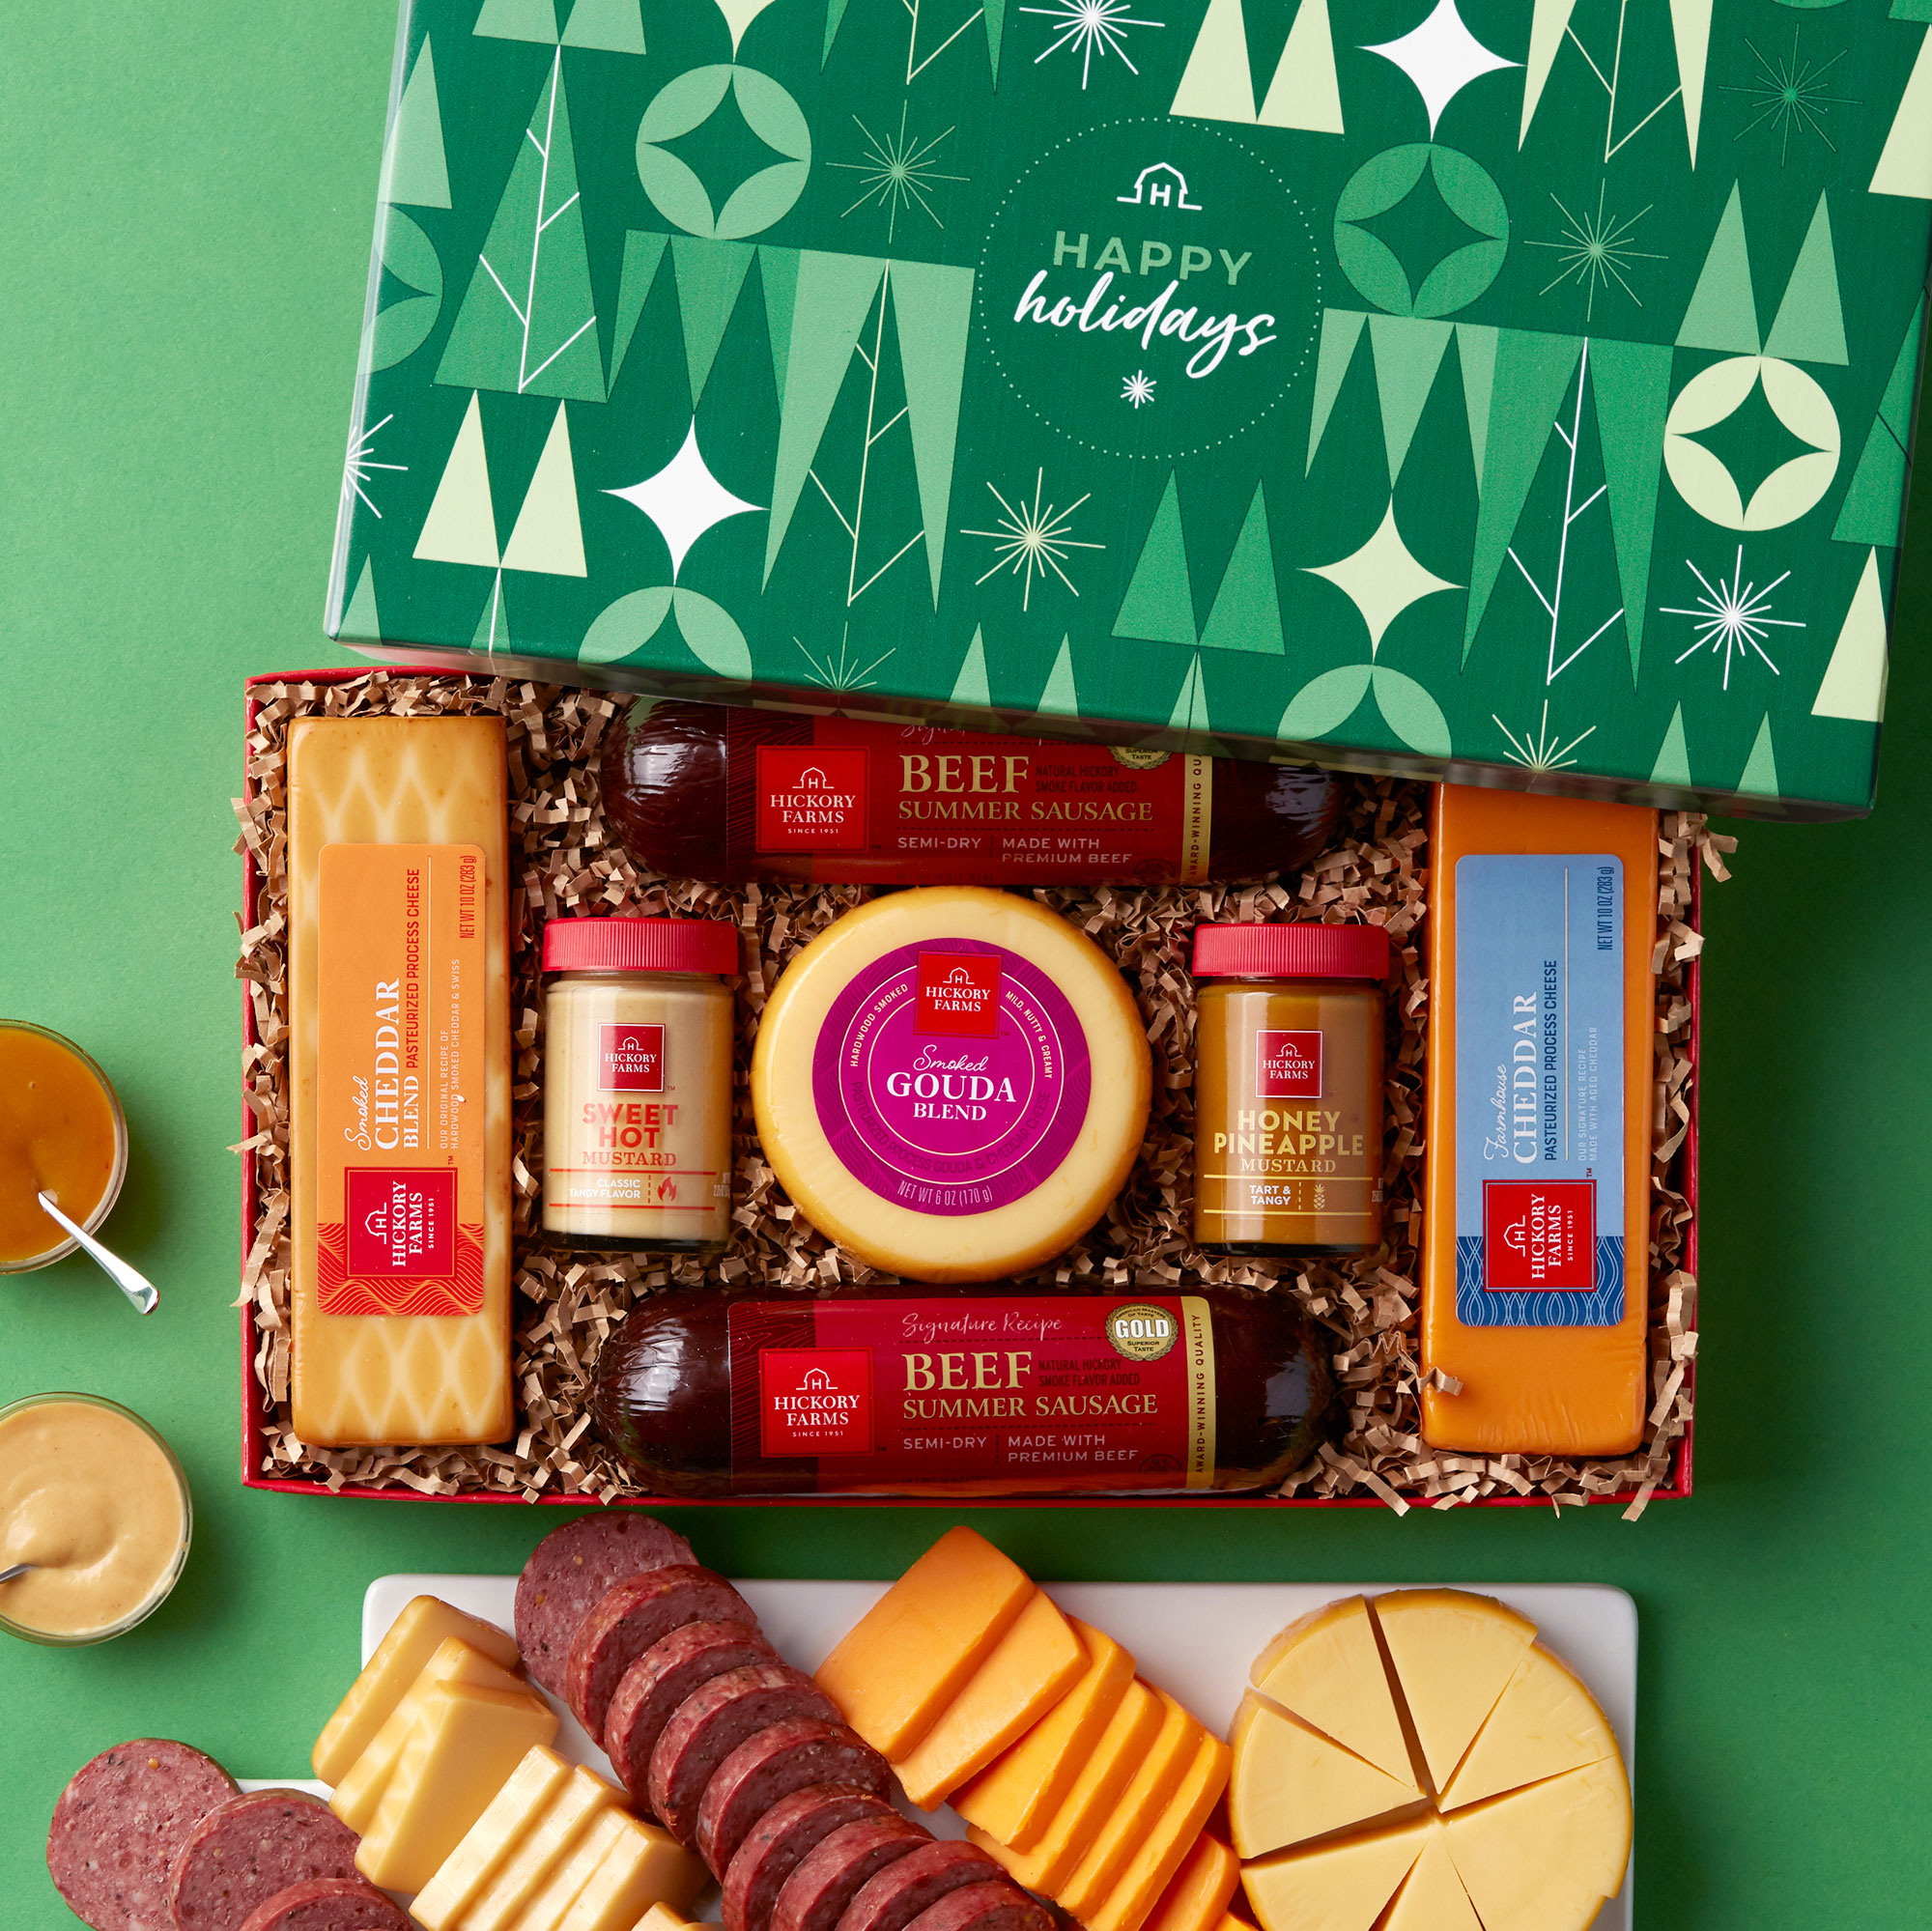 https://www.hickoryfarms.com/on/demandware.static/-/Sites-Web-Master-Catalog/default/dw7ea2b84c/images/products/happy-holidays-summer-sausage-cheese-gift-box-new-006546-1.jpg